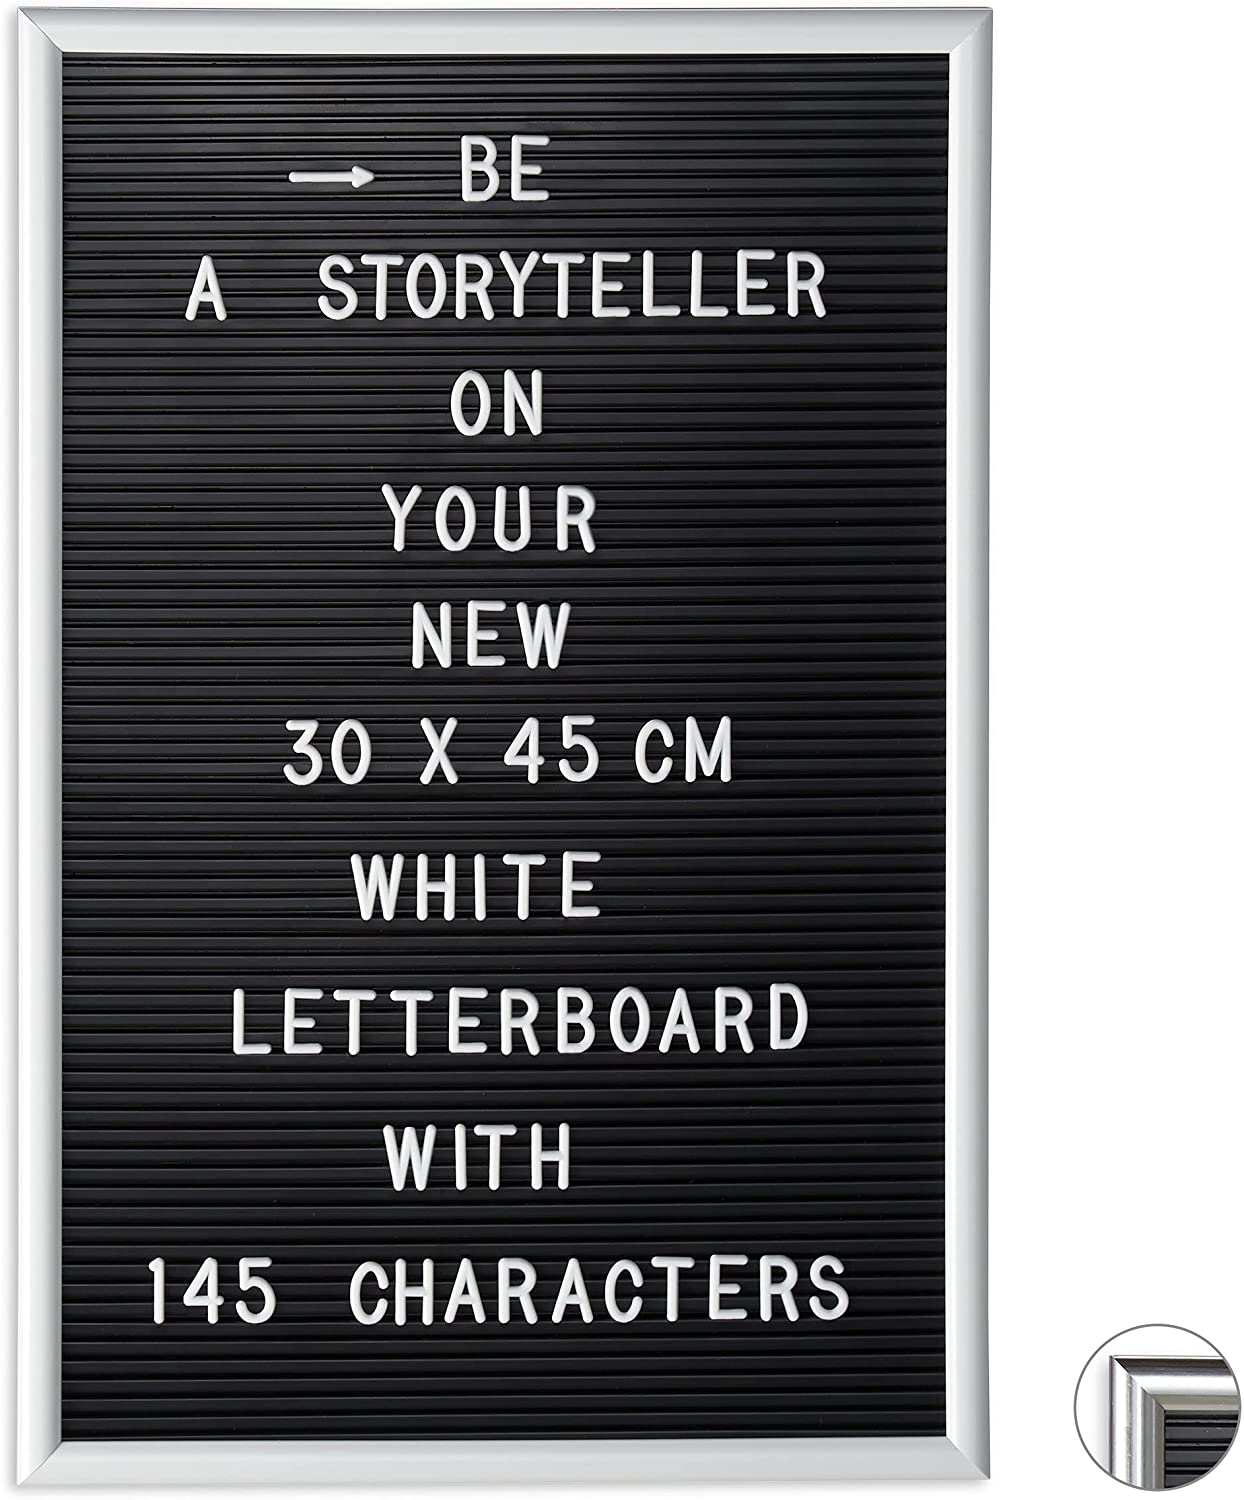 Relaxdays 1 x letterboard, 145 letters, numbers, special characters, 45 x 30 cm, letter board for inserting, plastic, white